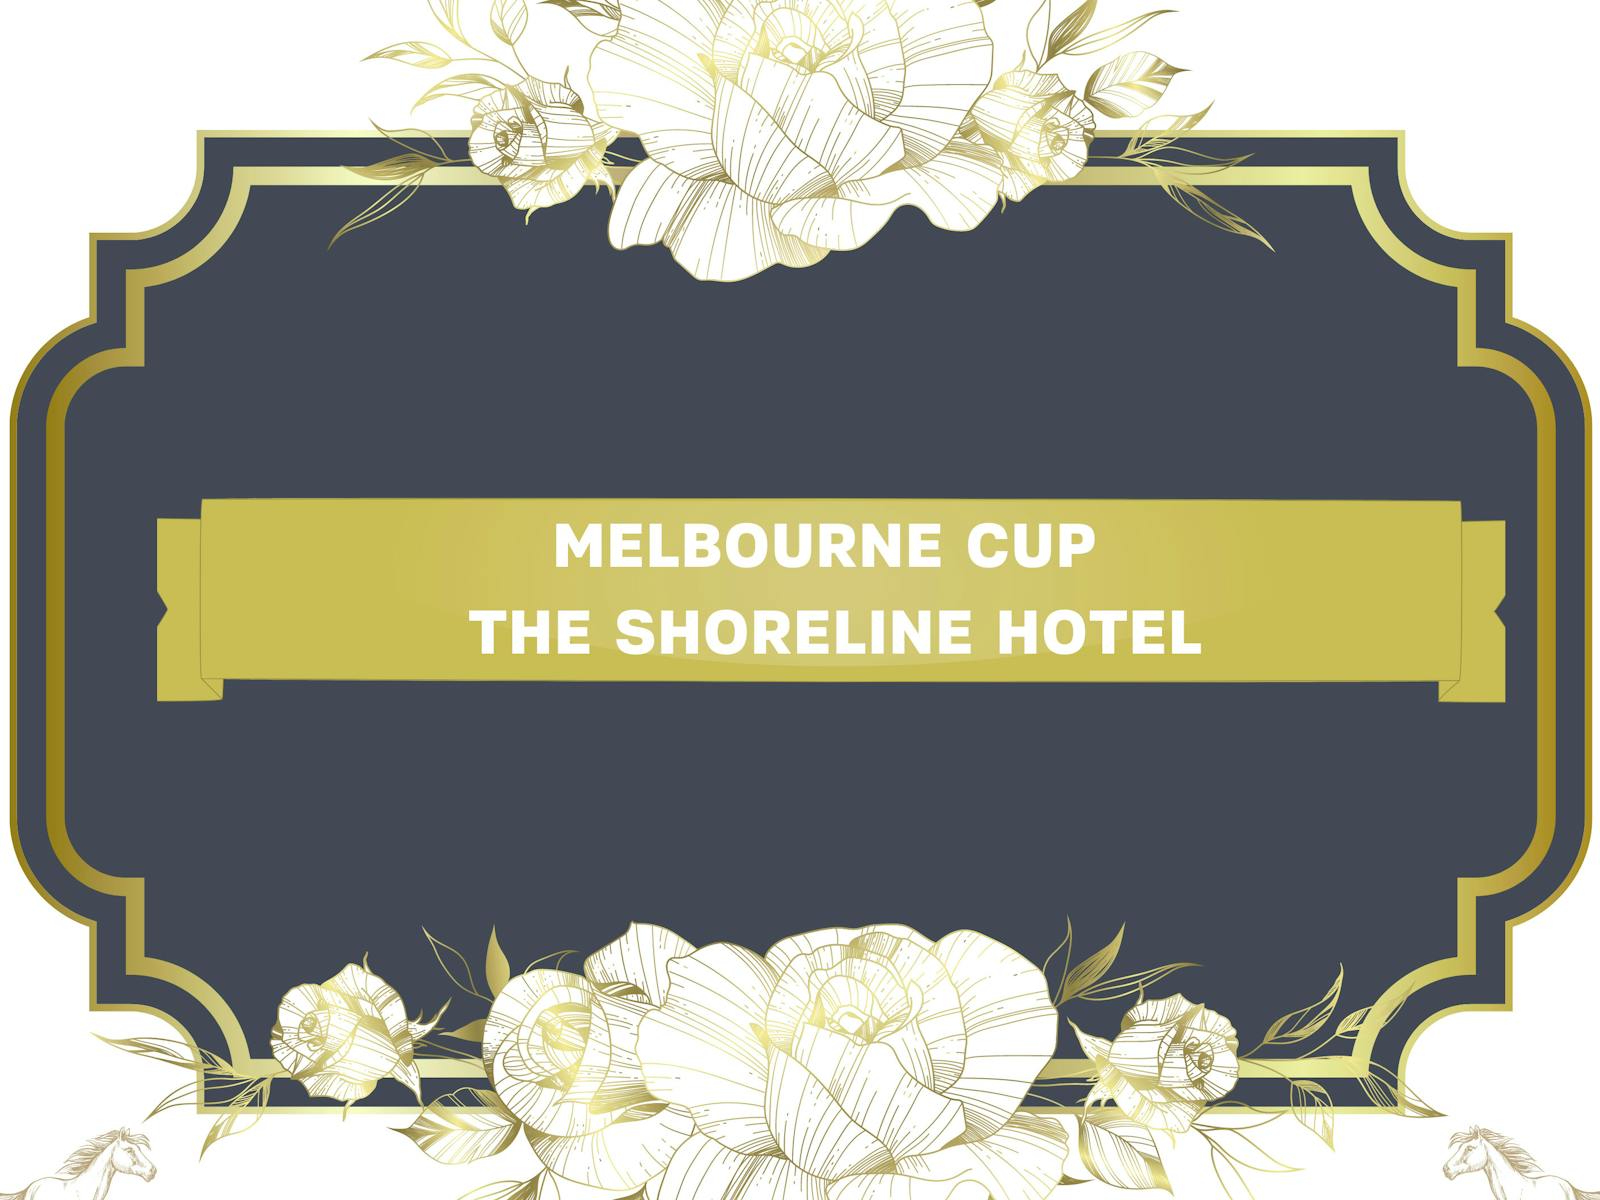 Image for Melbourne Cup at The Shoreline Hotel